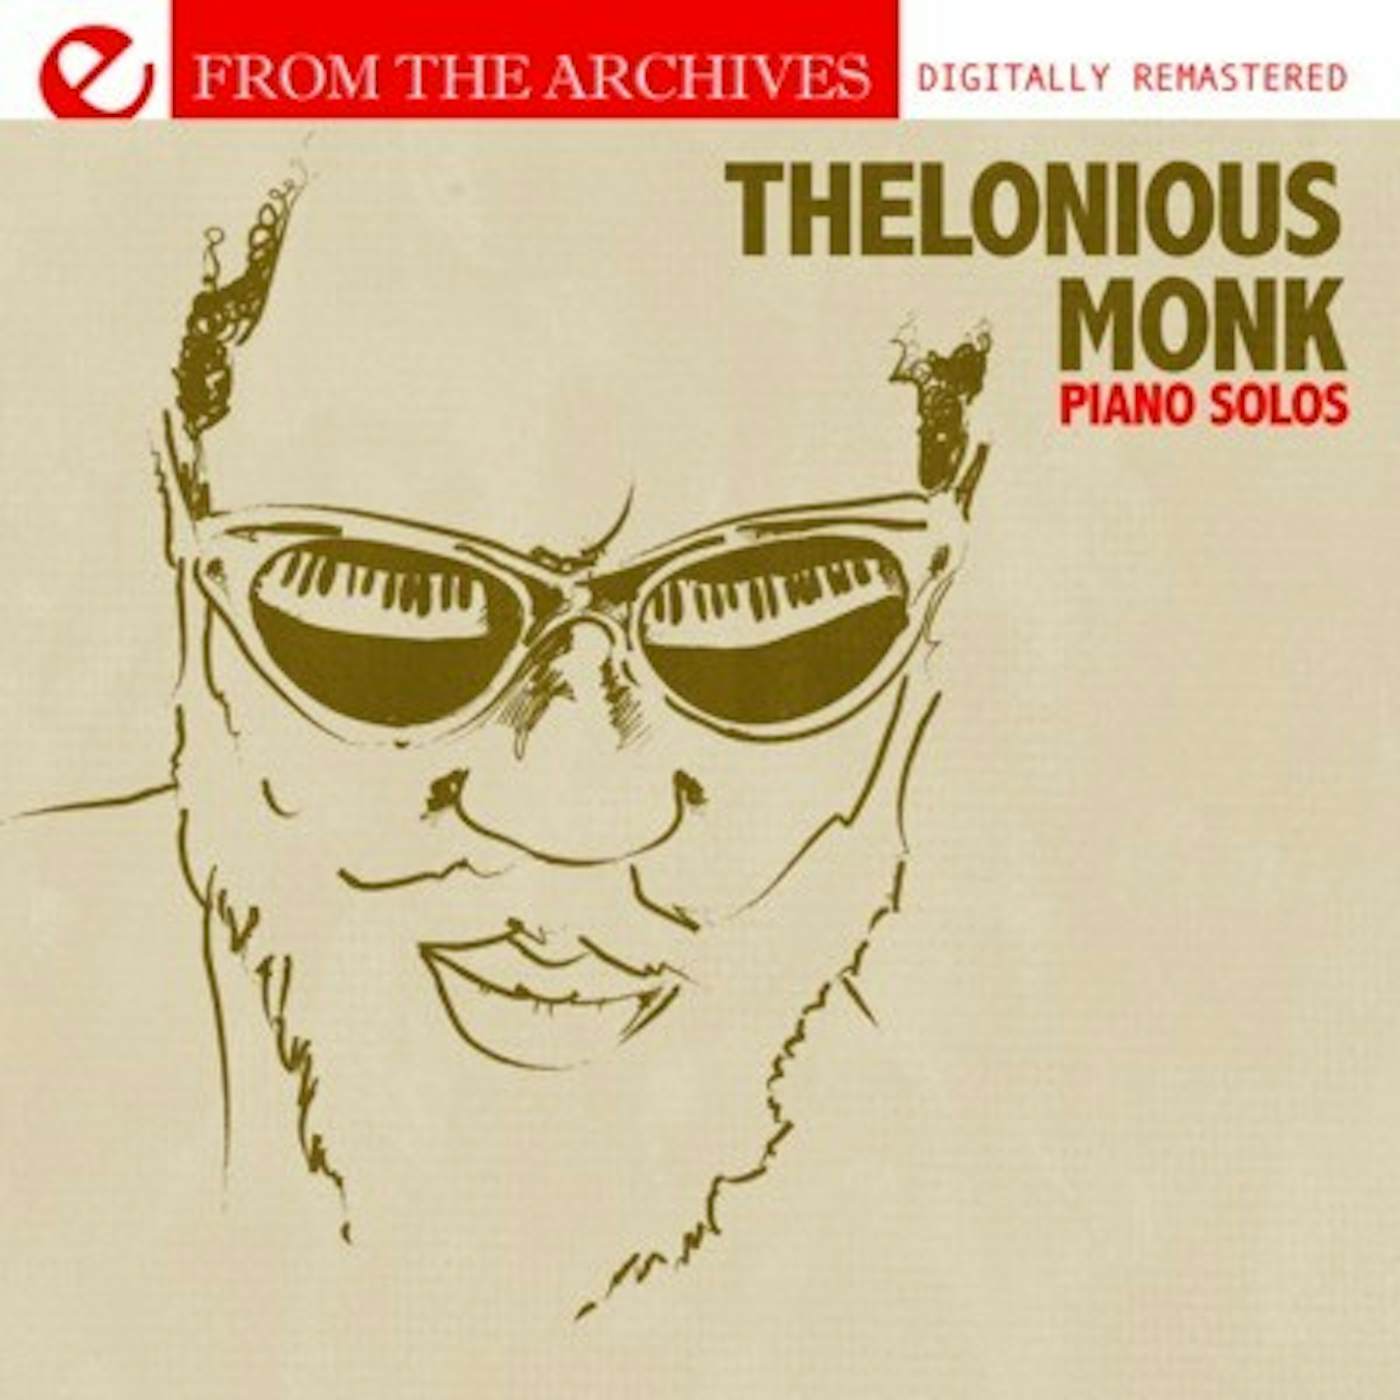 Thelonious Monk PIANO SOLOS - FROM THE ARCHIVES CD